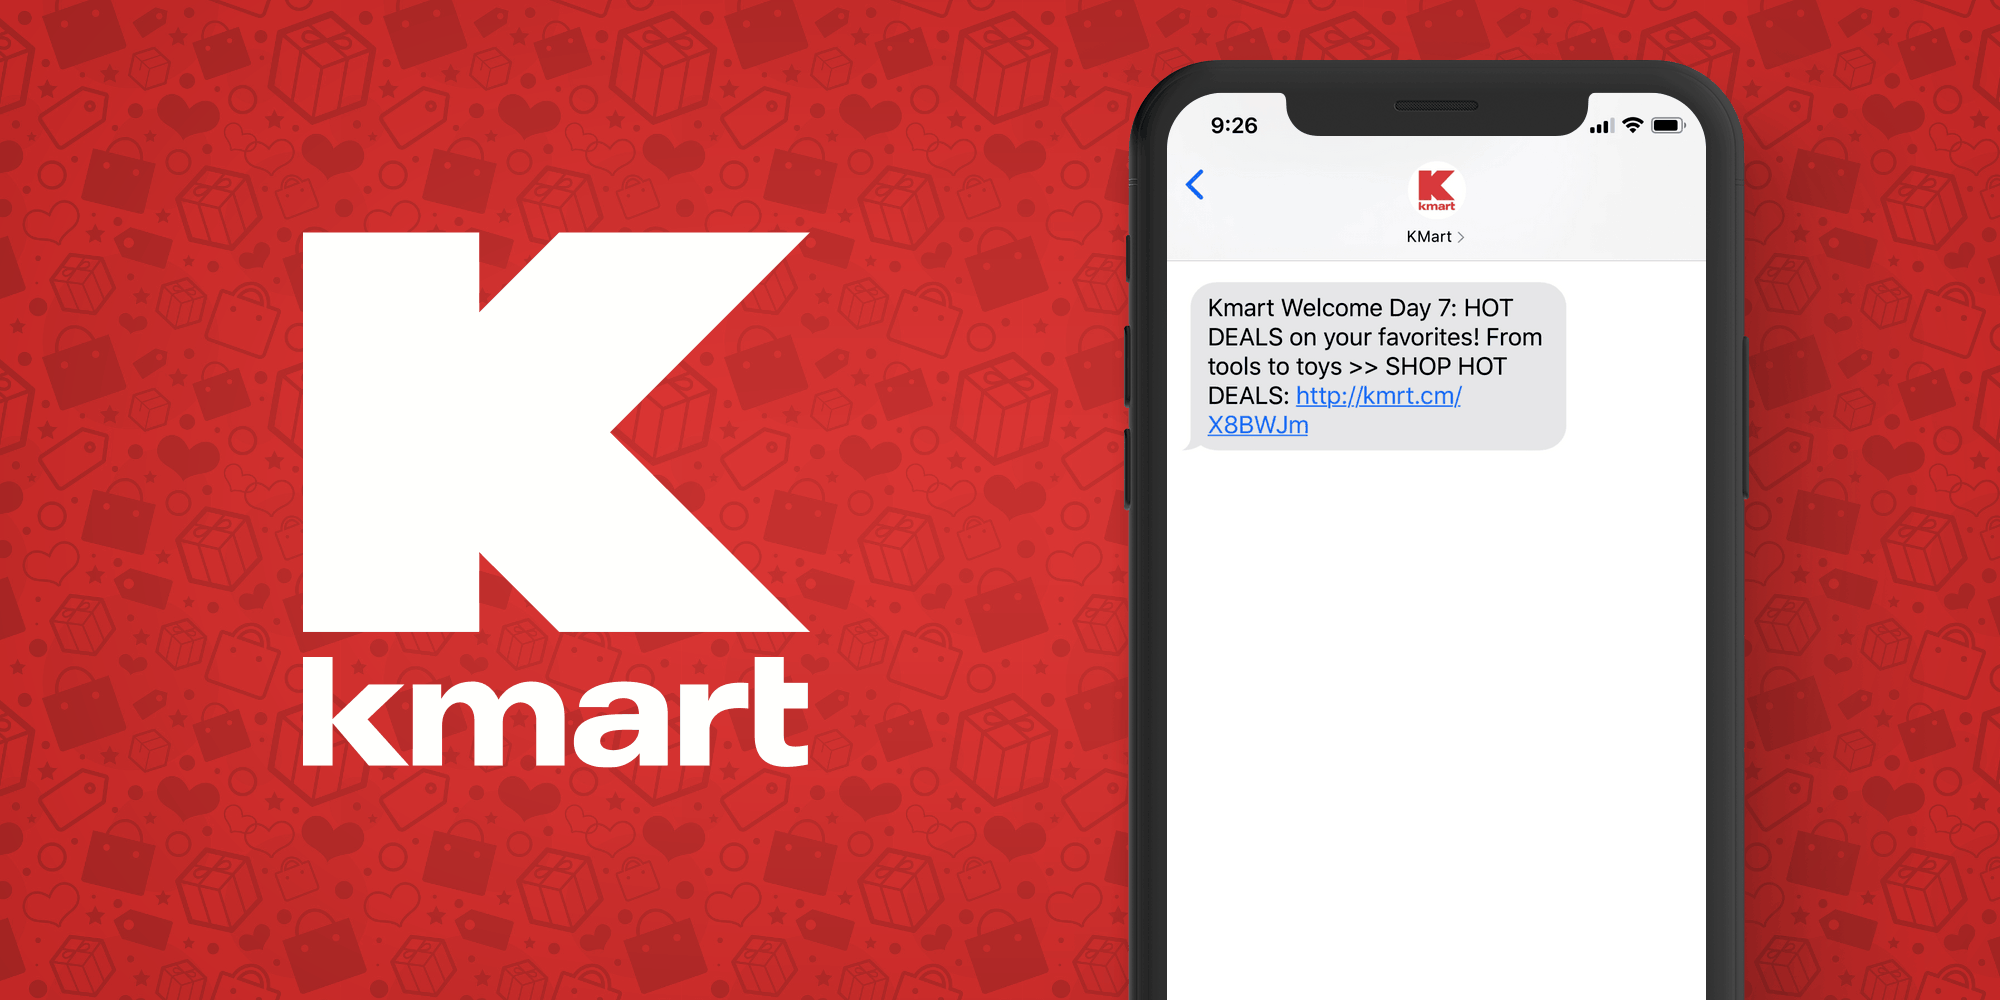 Kmart SMS Marketing Example - 50 Examples of Brands Using SMS Marketing